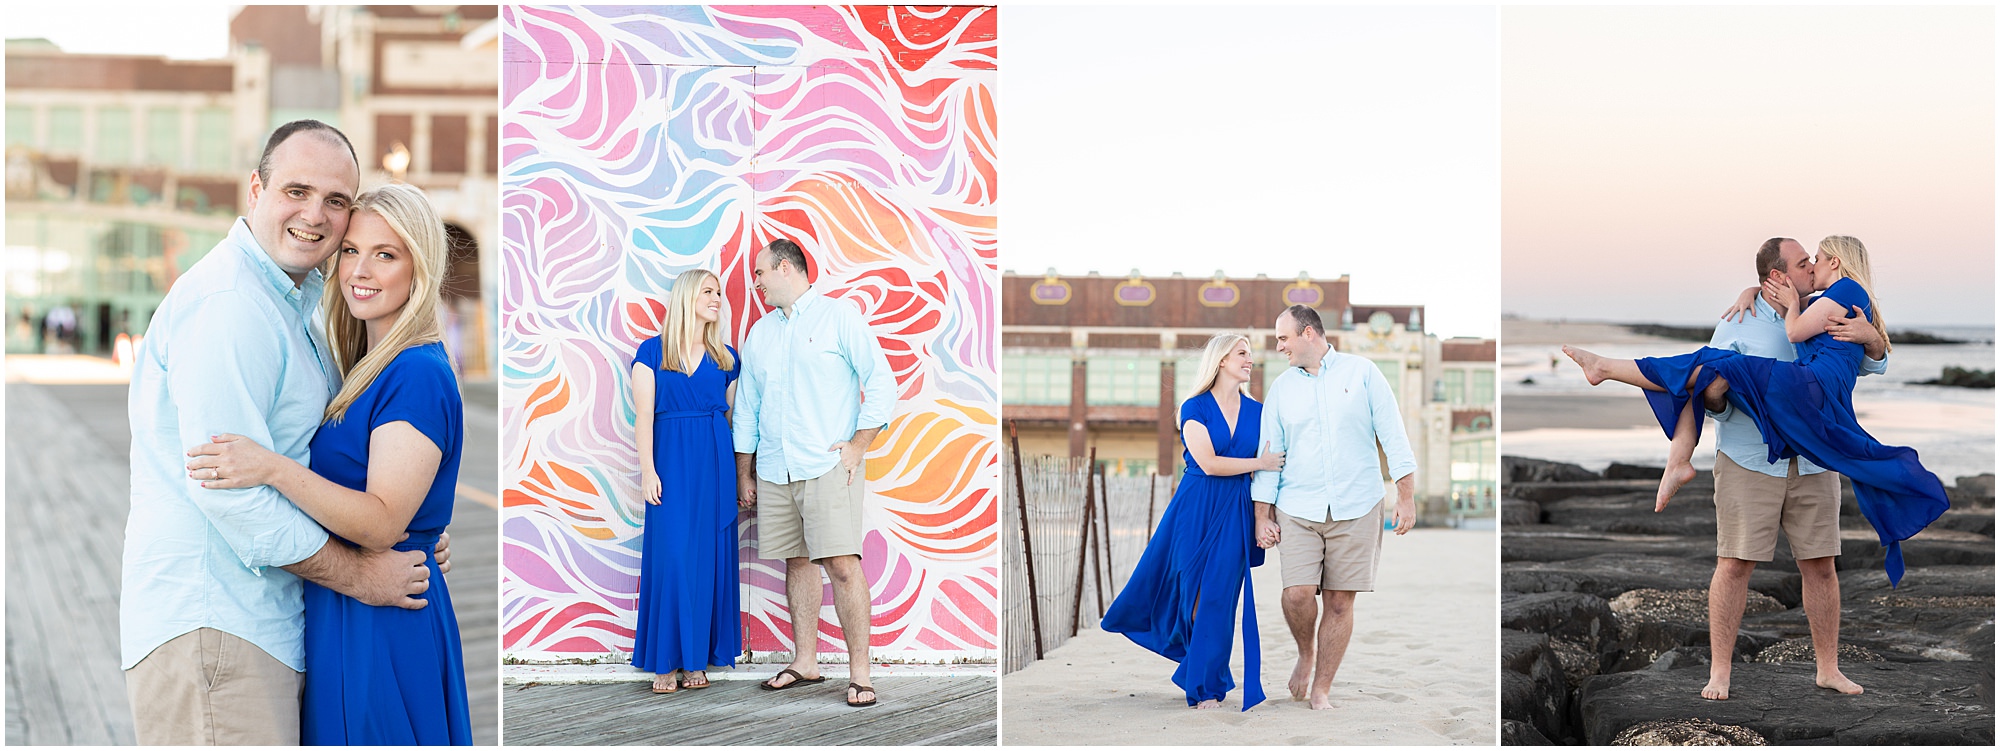 Asbury Park is a great location for a New Jersey engagement session 